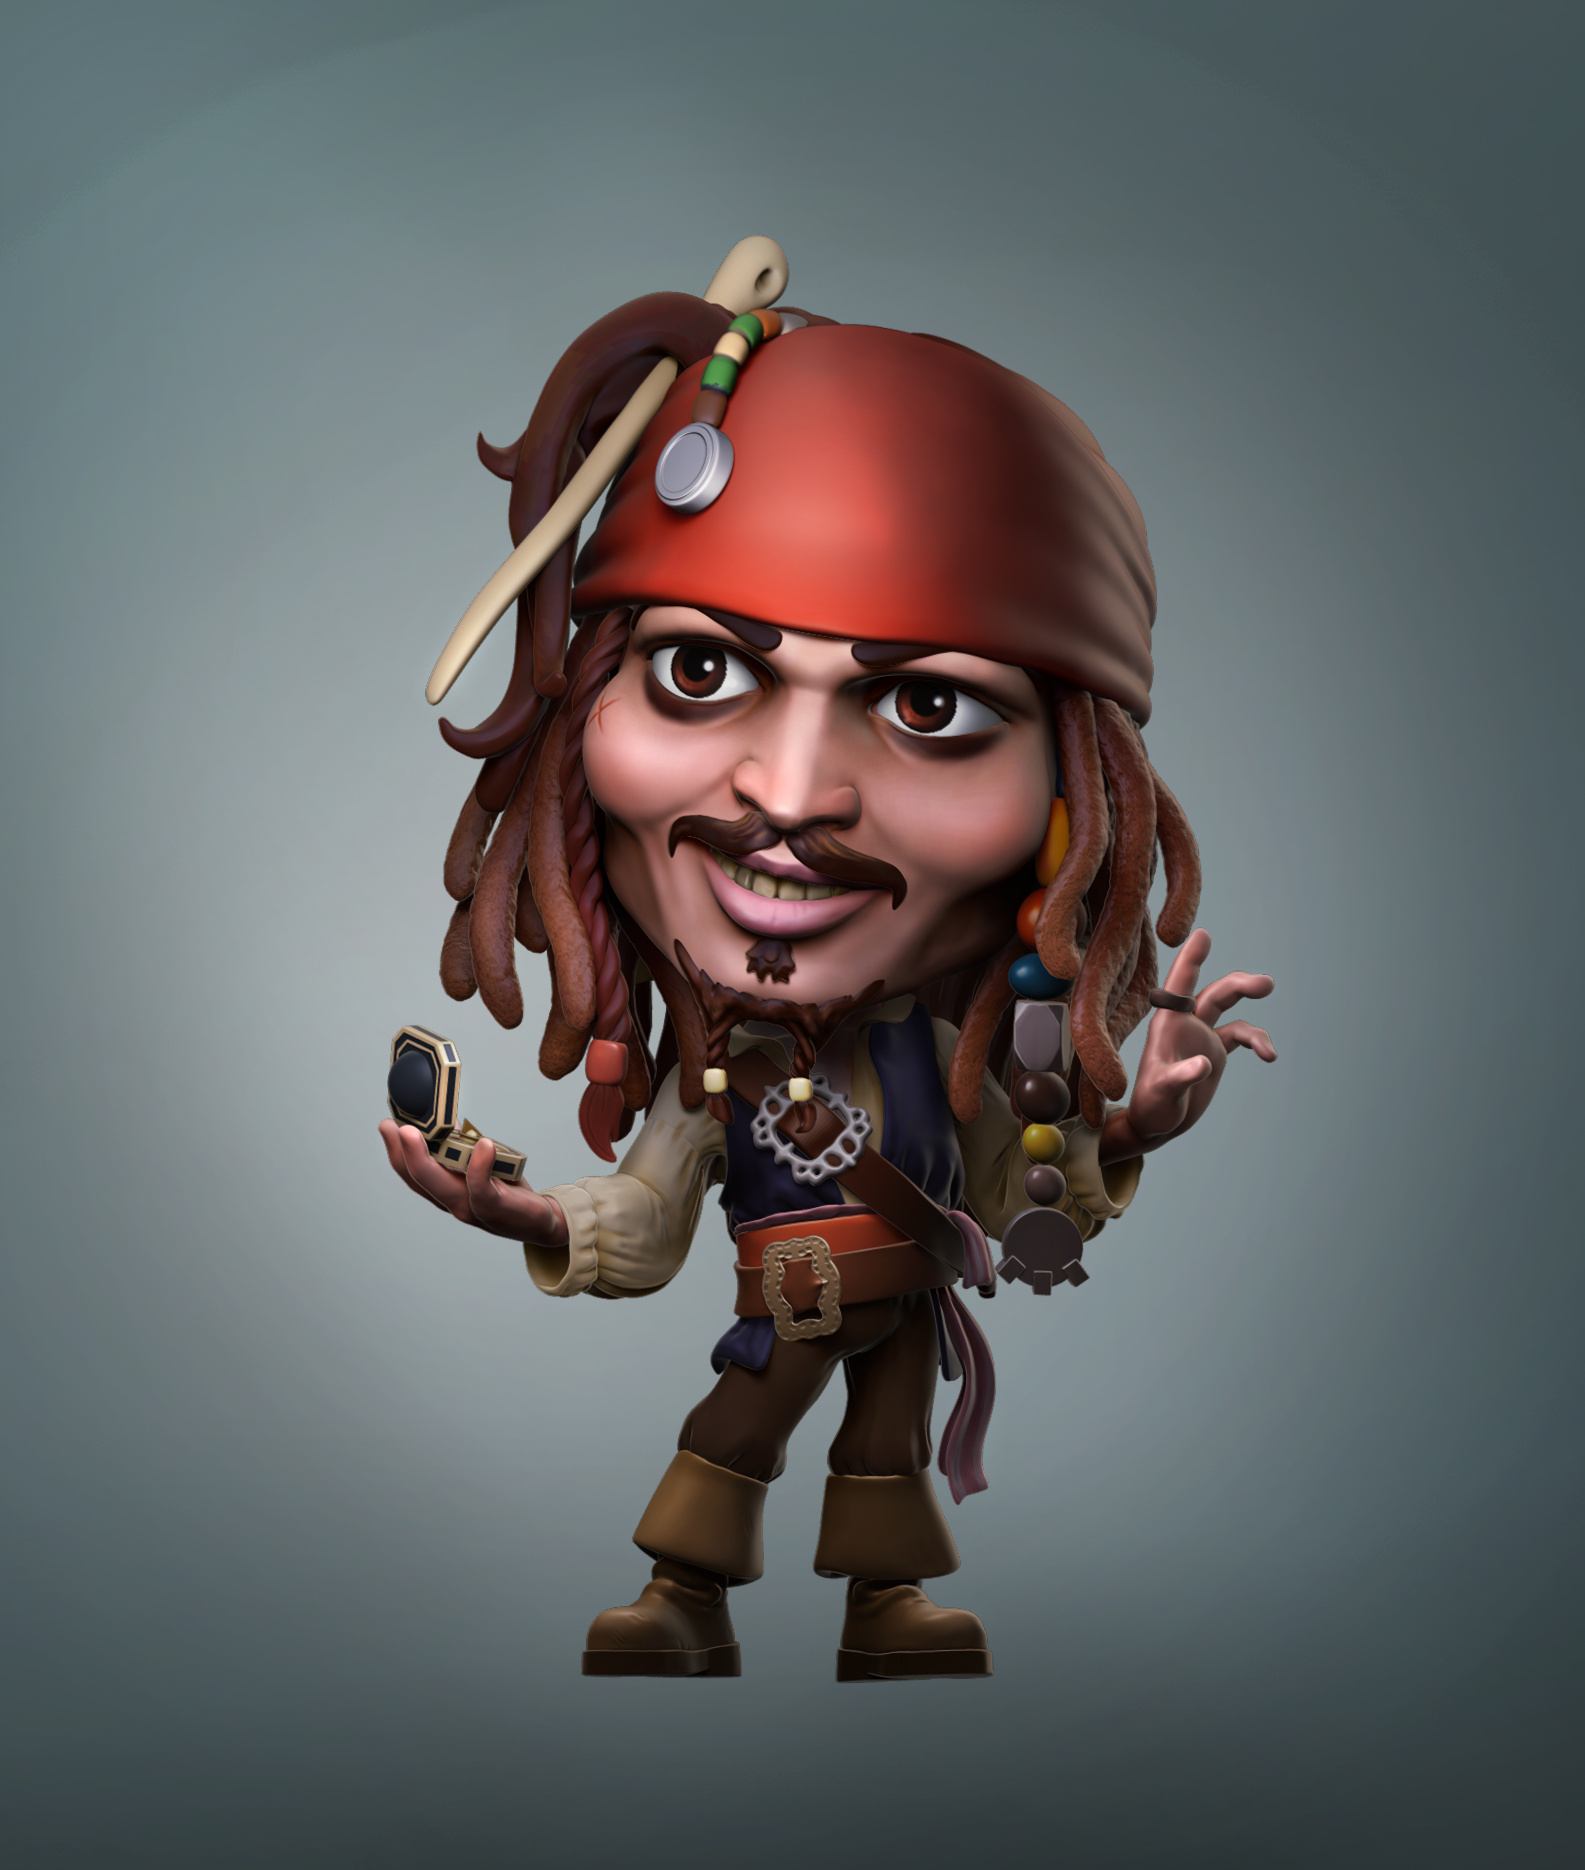 The little Jack Sparrow - ZBrushCentral